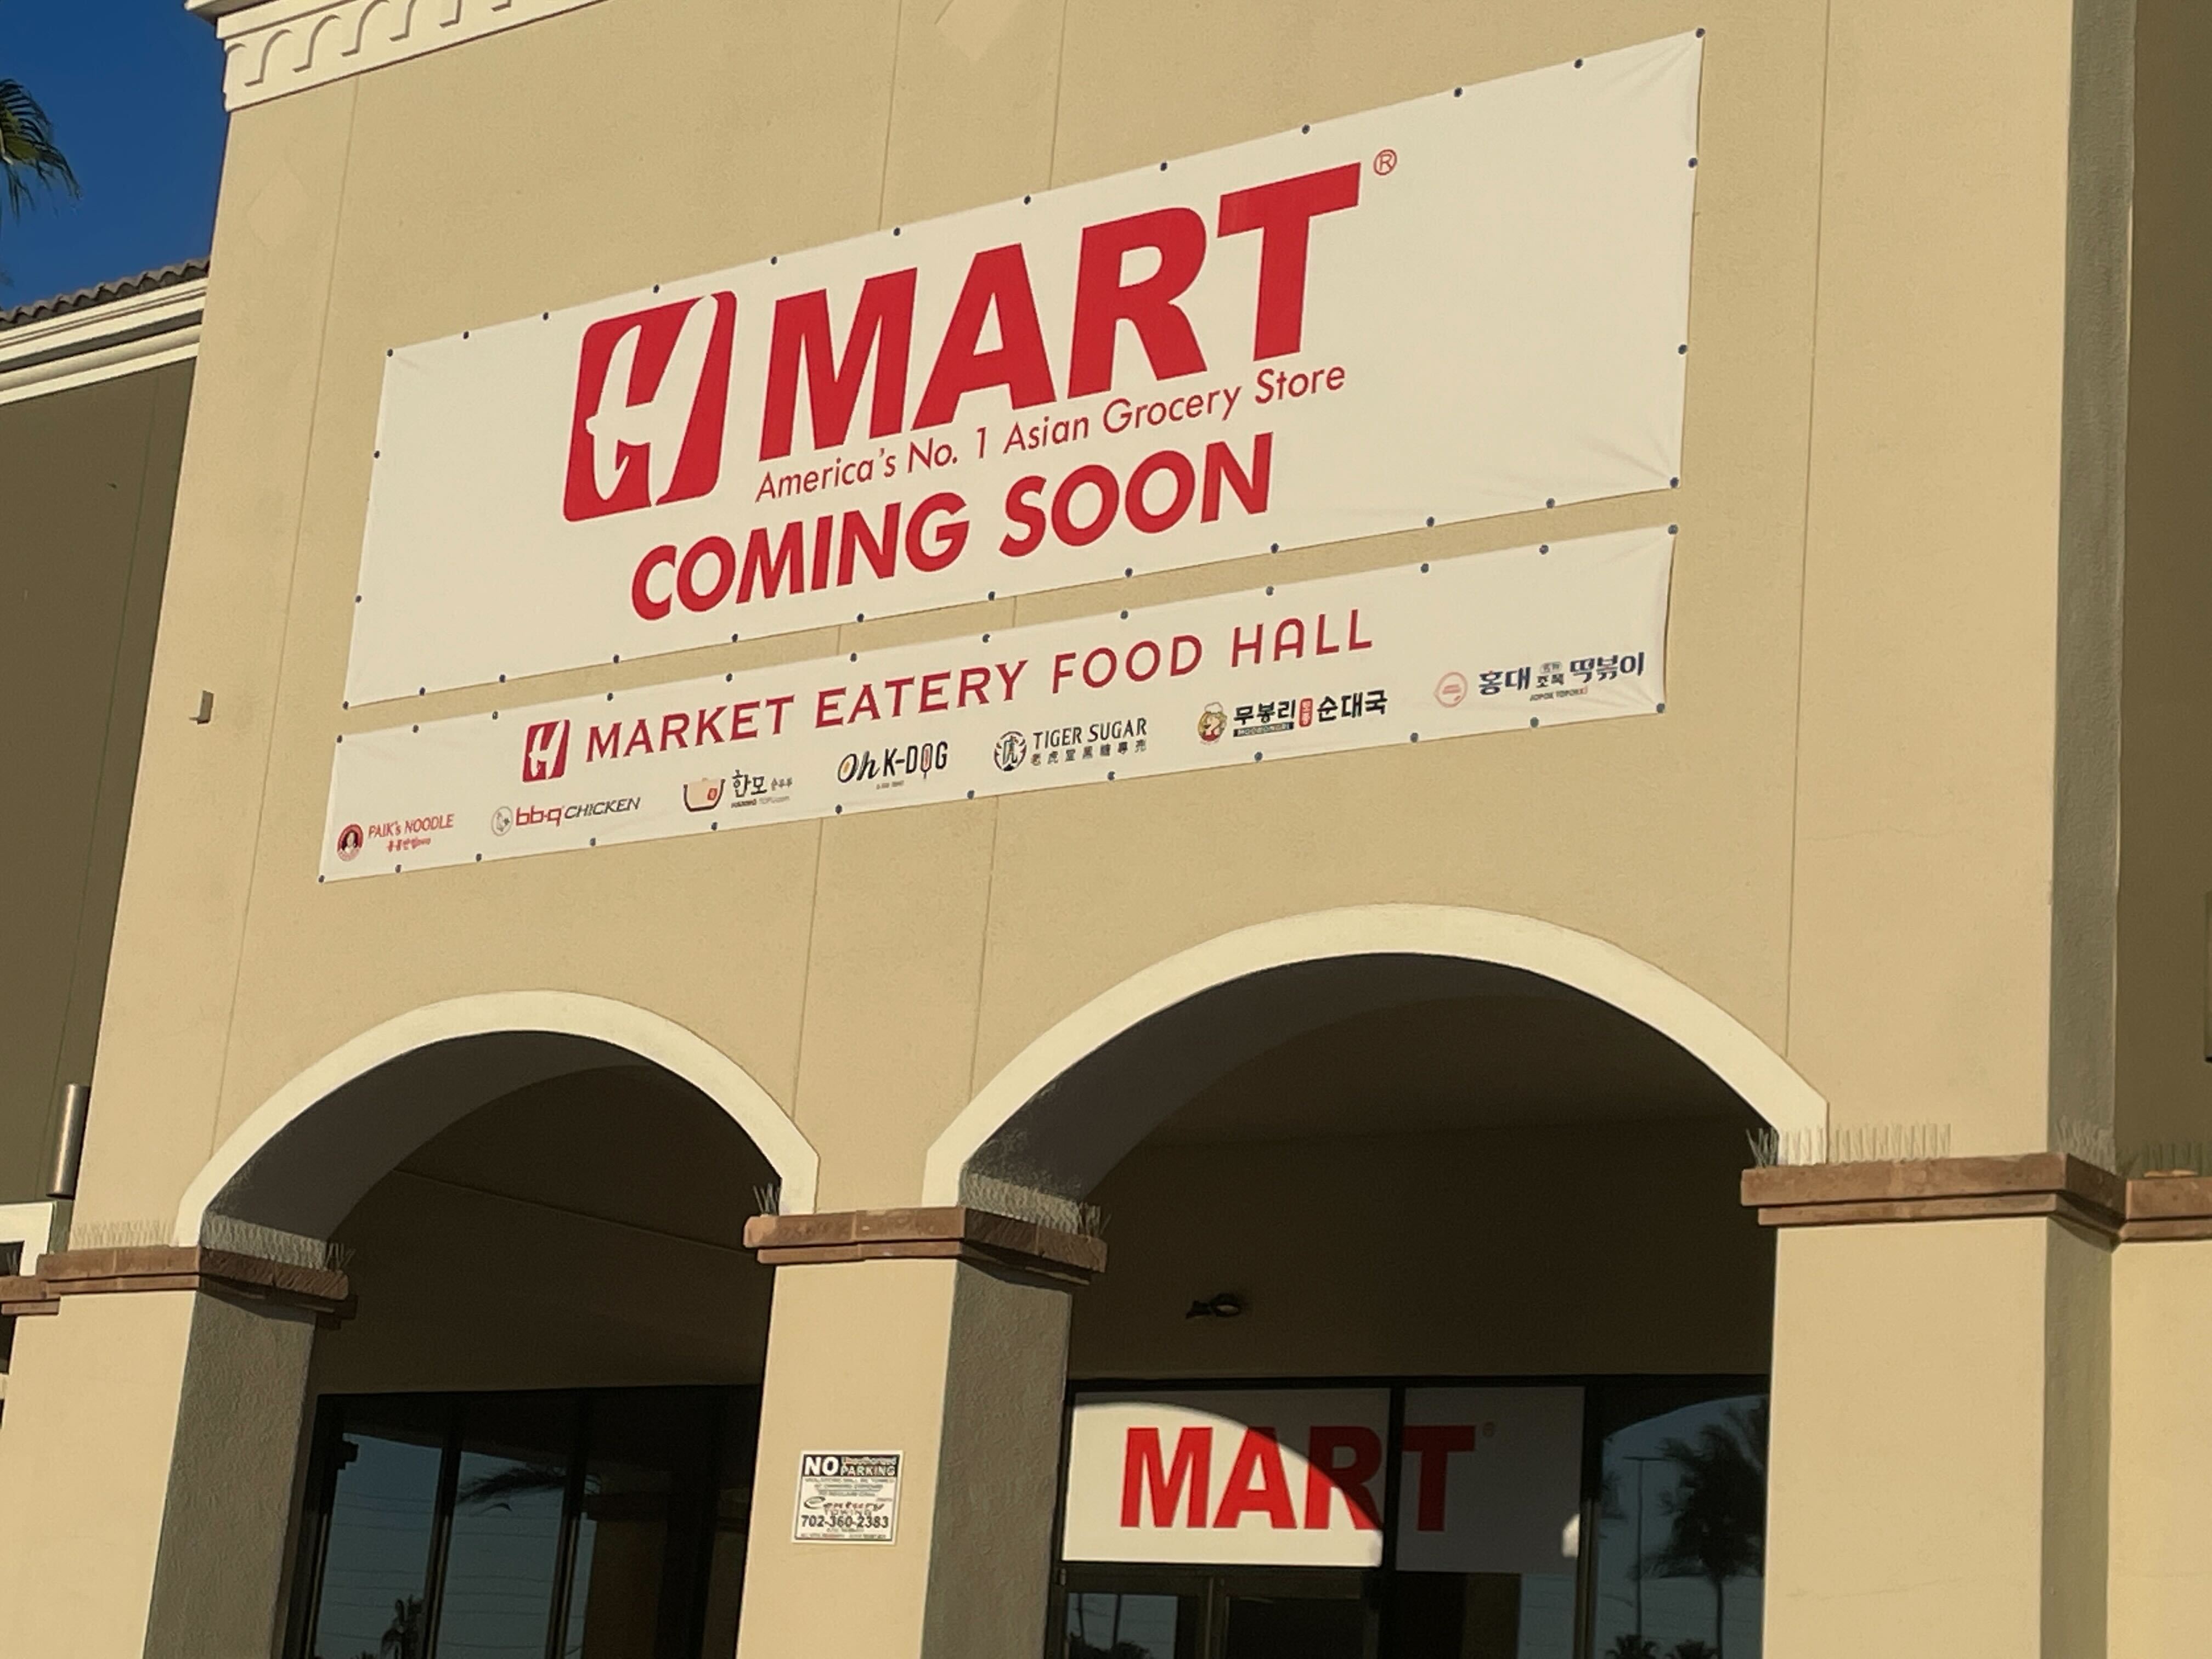 H-Mart Las Vegas will open with a food hall.